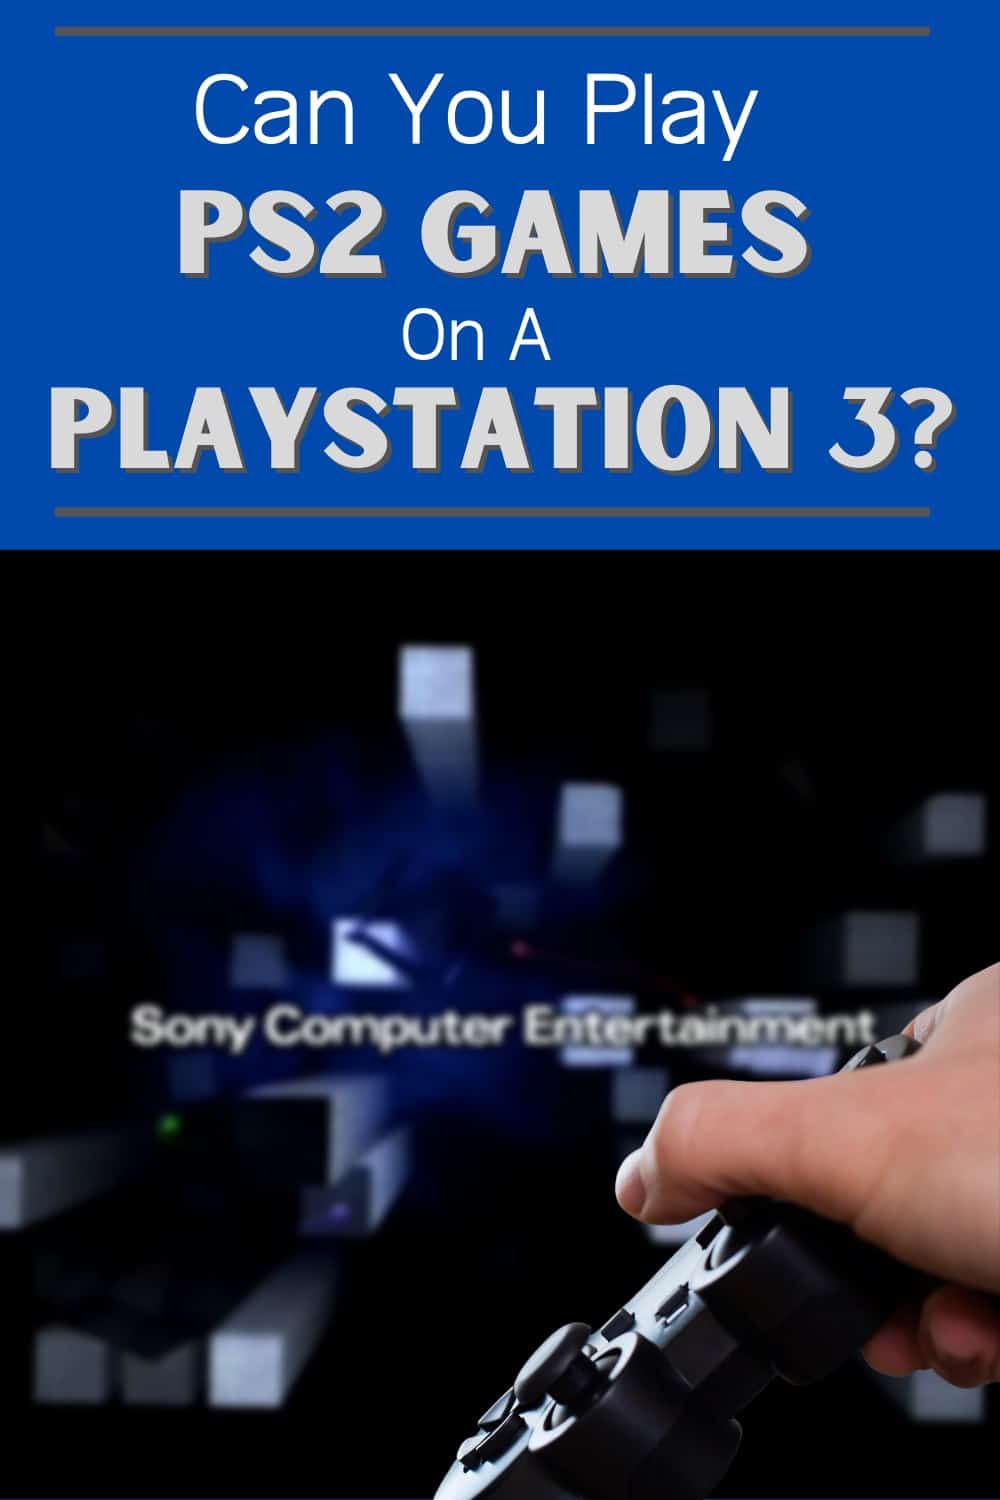 Yes. The PlayStation 3 is backwards compatible with PlayStation 2 games